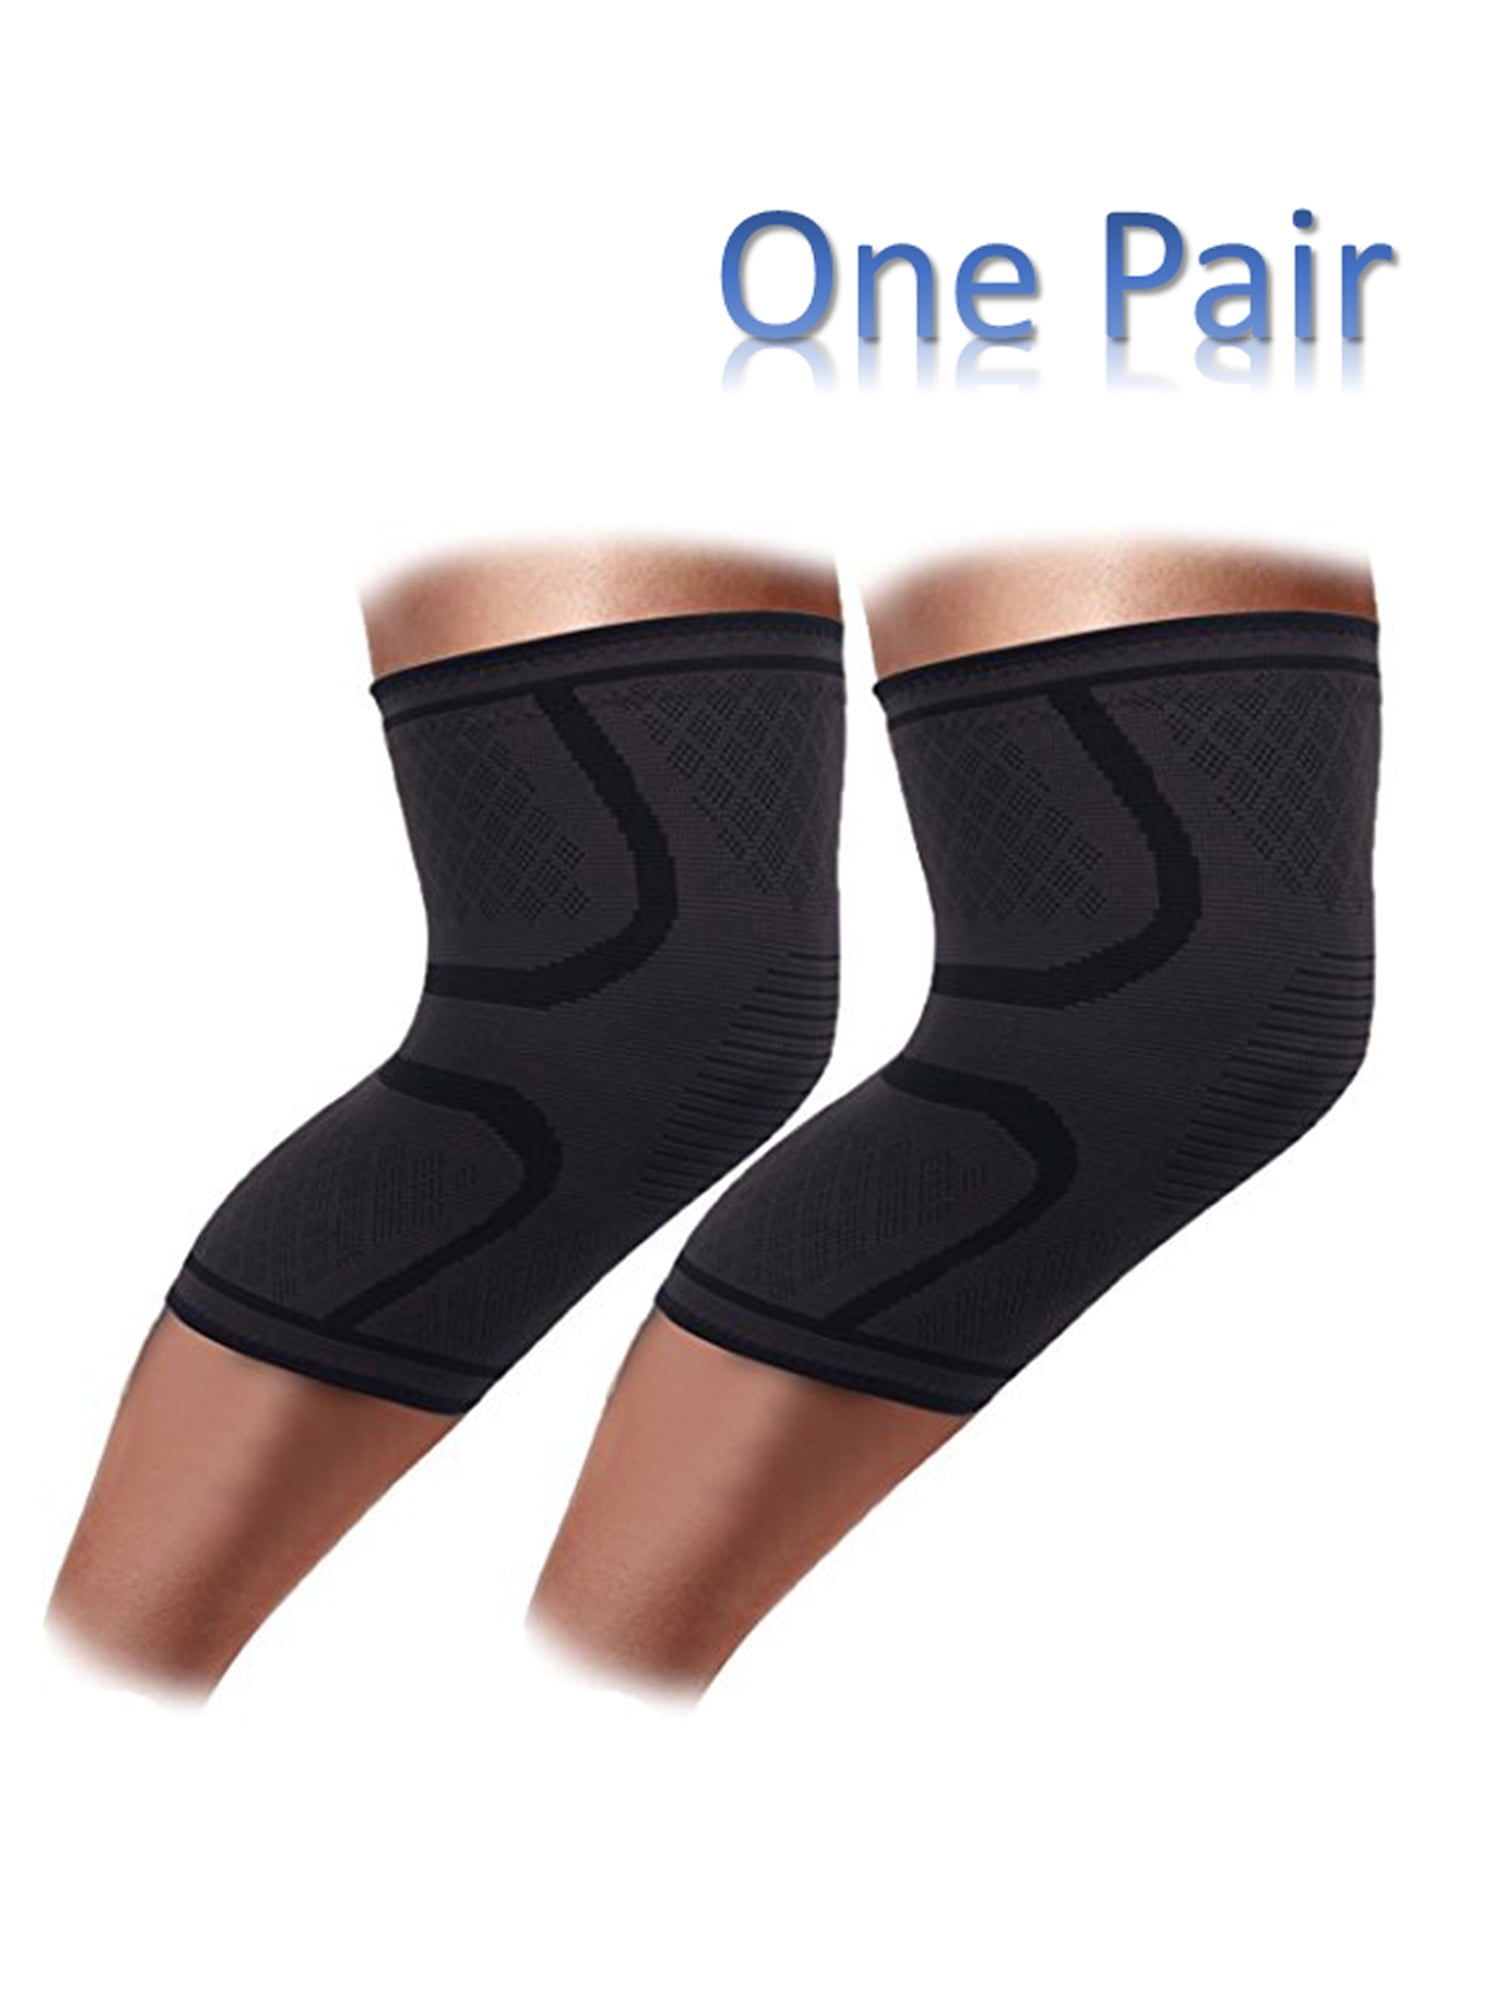 Knee Support for Crossfit Weightlifting Powerlifting Running Hiking Knee Protector for Meniscus Tear 2 Pack ACL MCL PCL Joint Pain Scuddles Knee Compression Sleeve Knee Brace for Women Men 